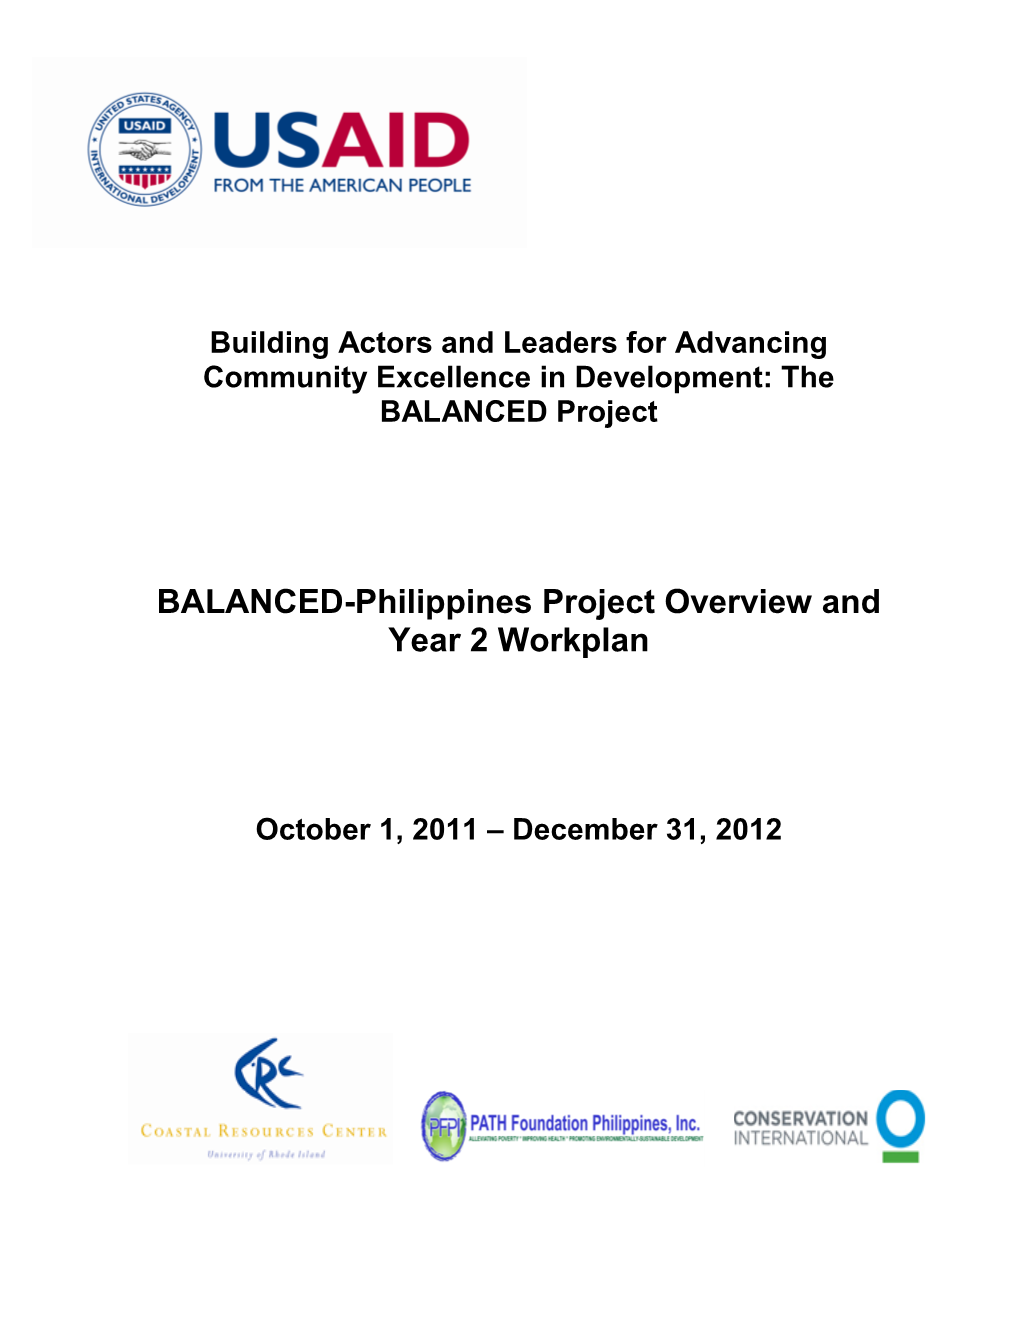 BALANCED-Philippines Project Overview and Year 2 Workplan October